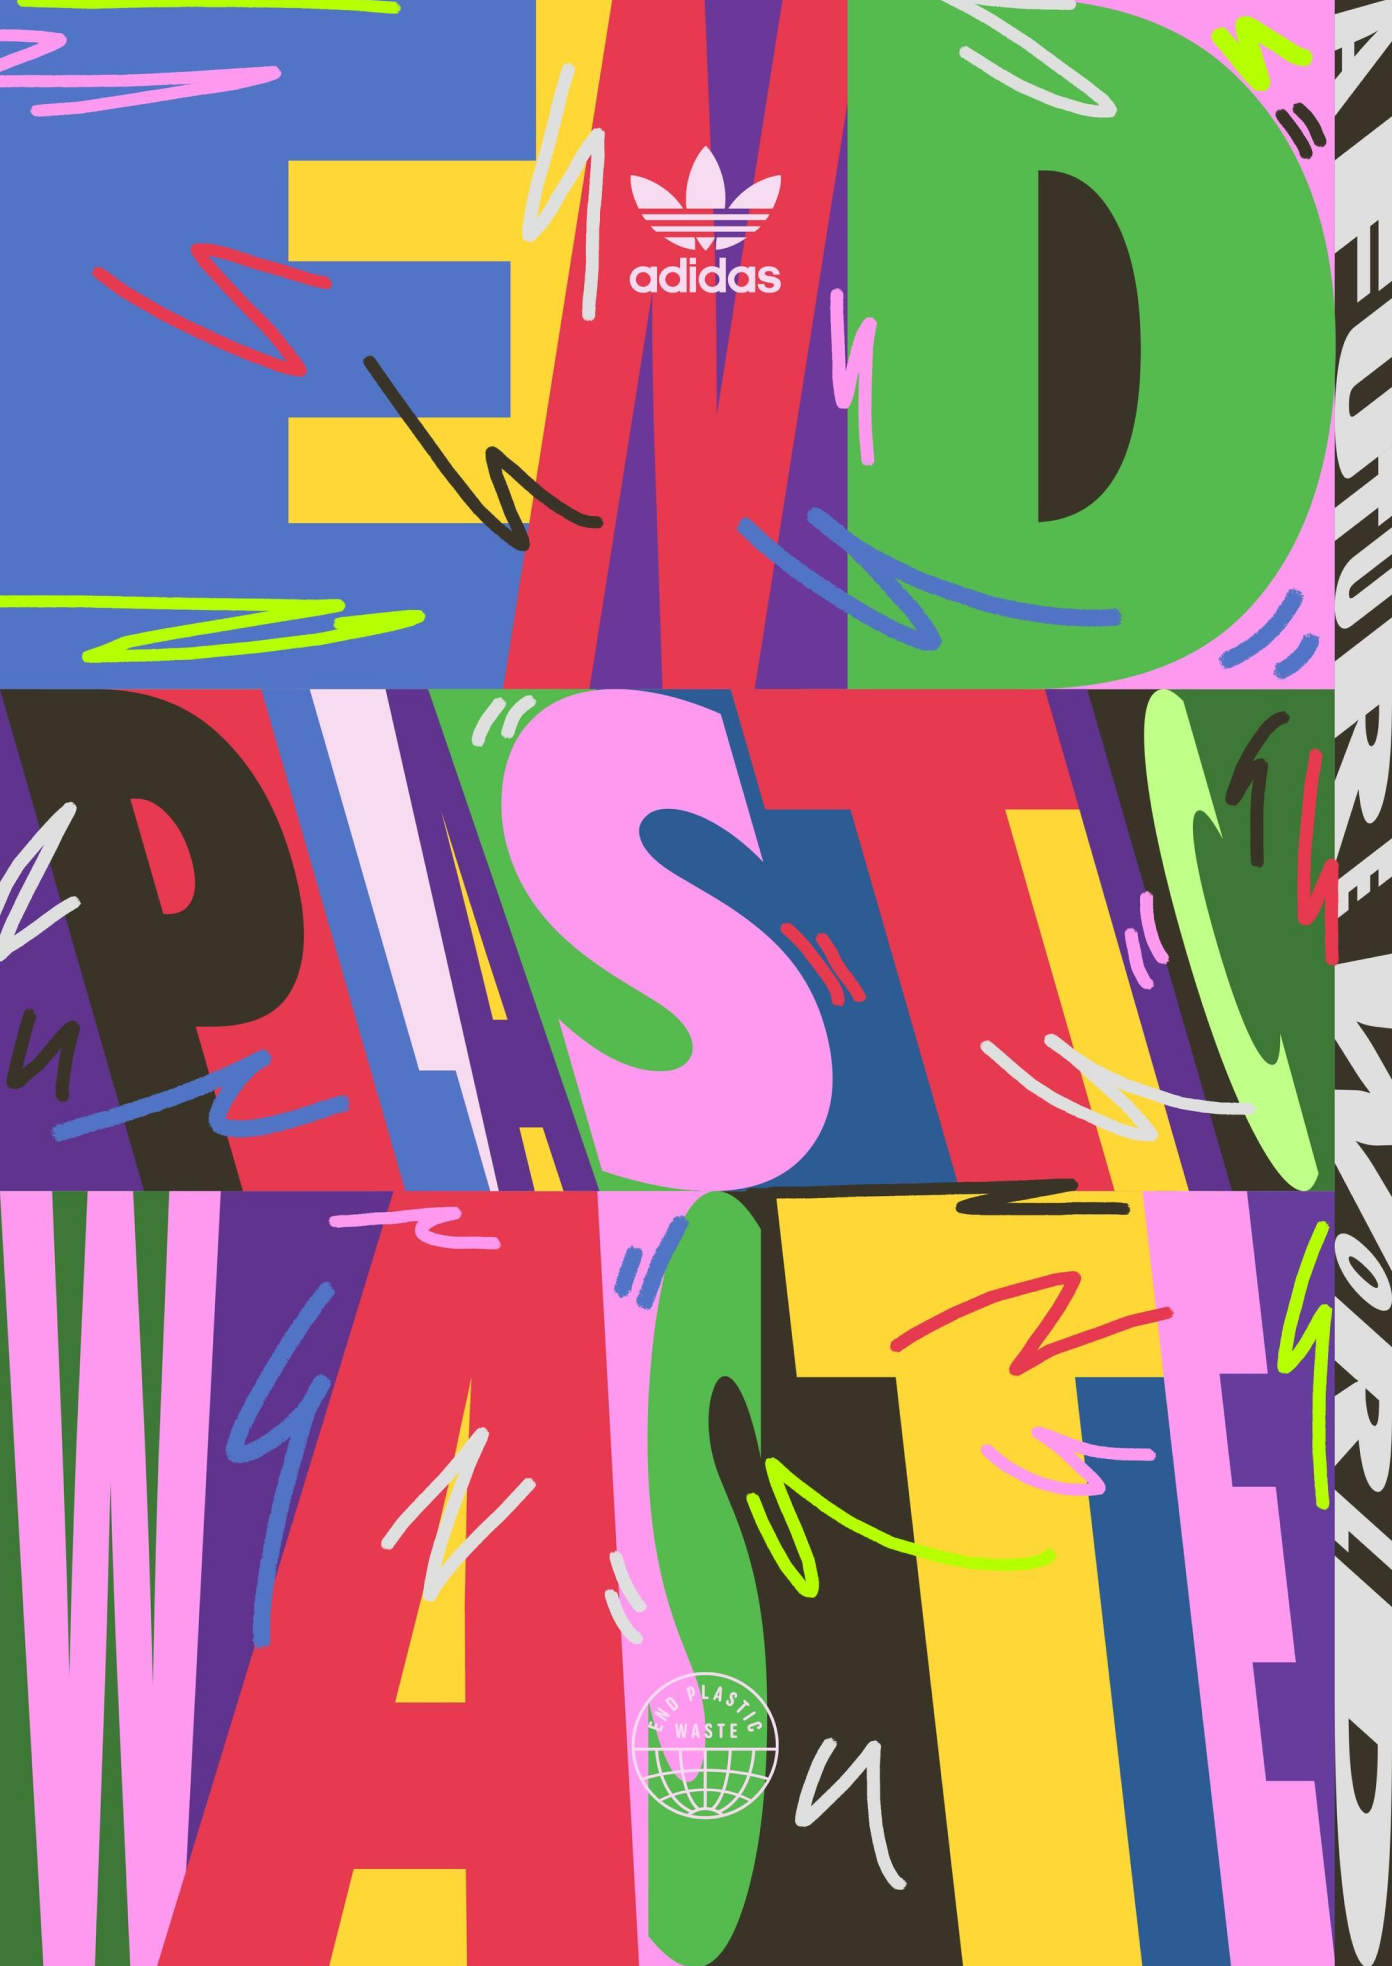 Bright coloured text artwork created by Kris Andrew Small for Adidas